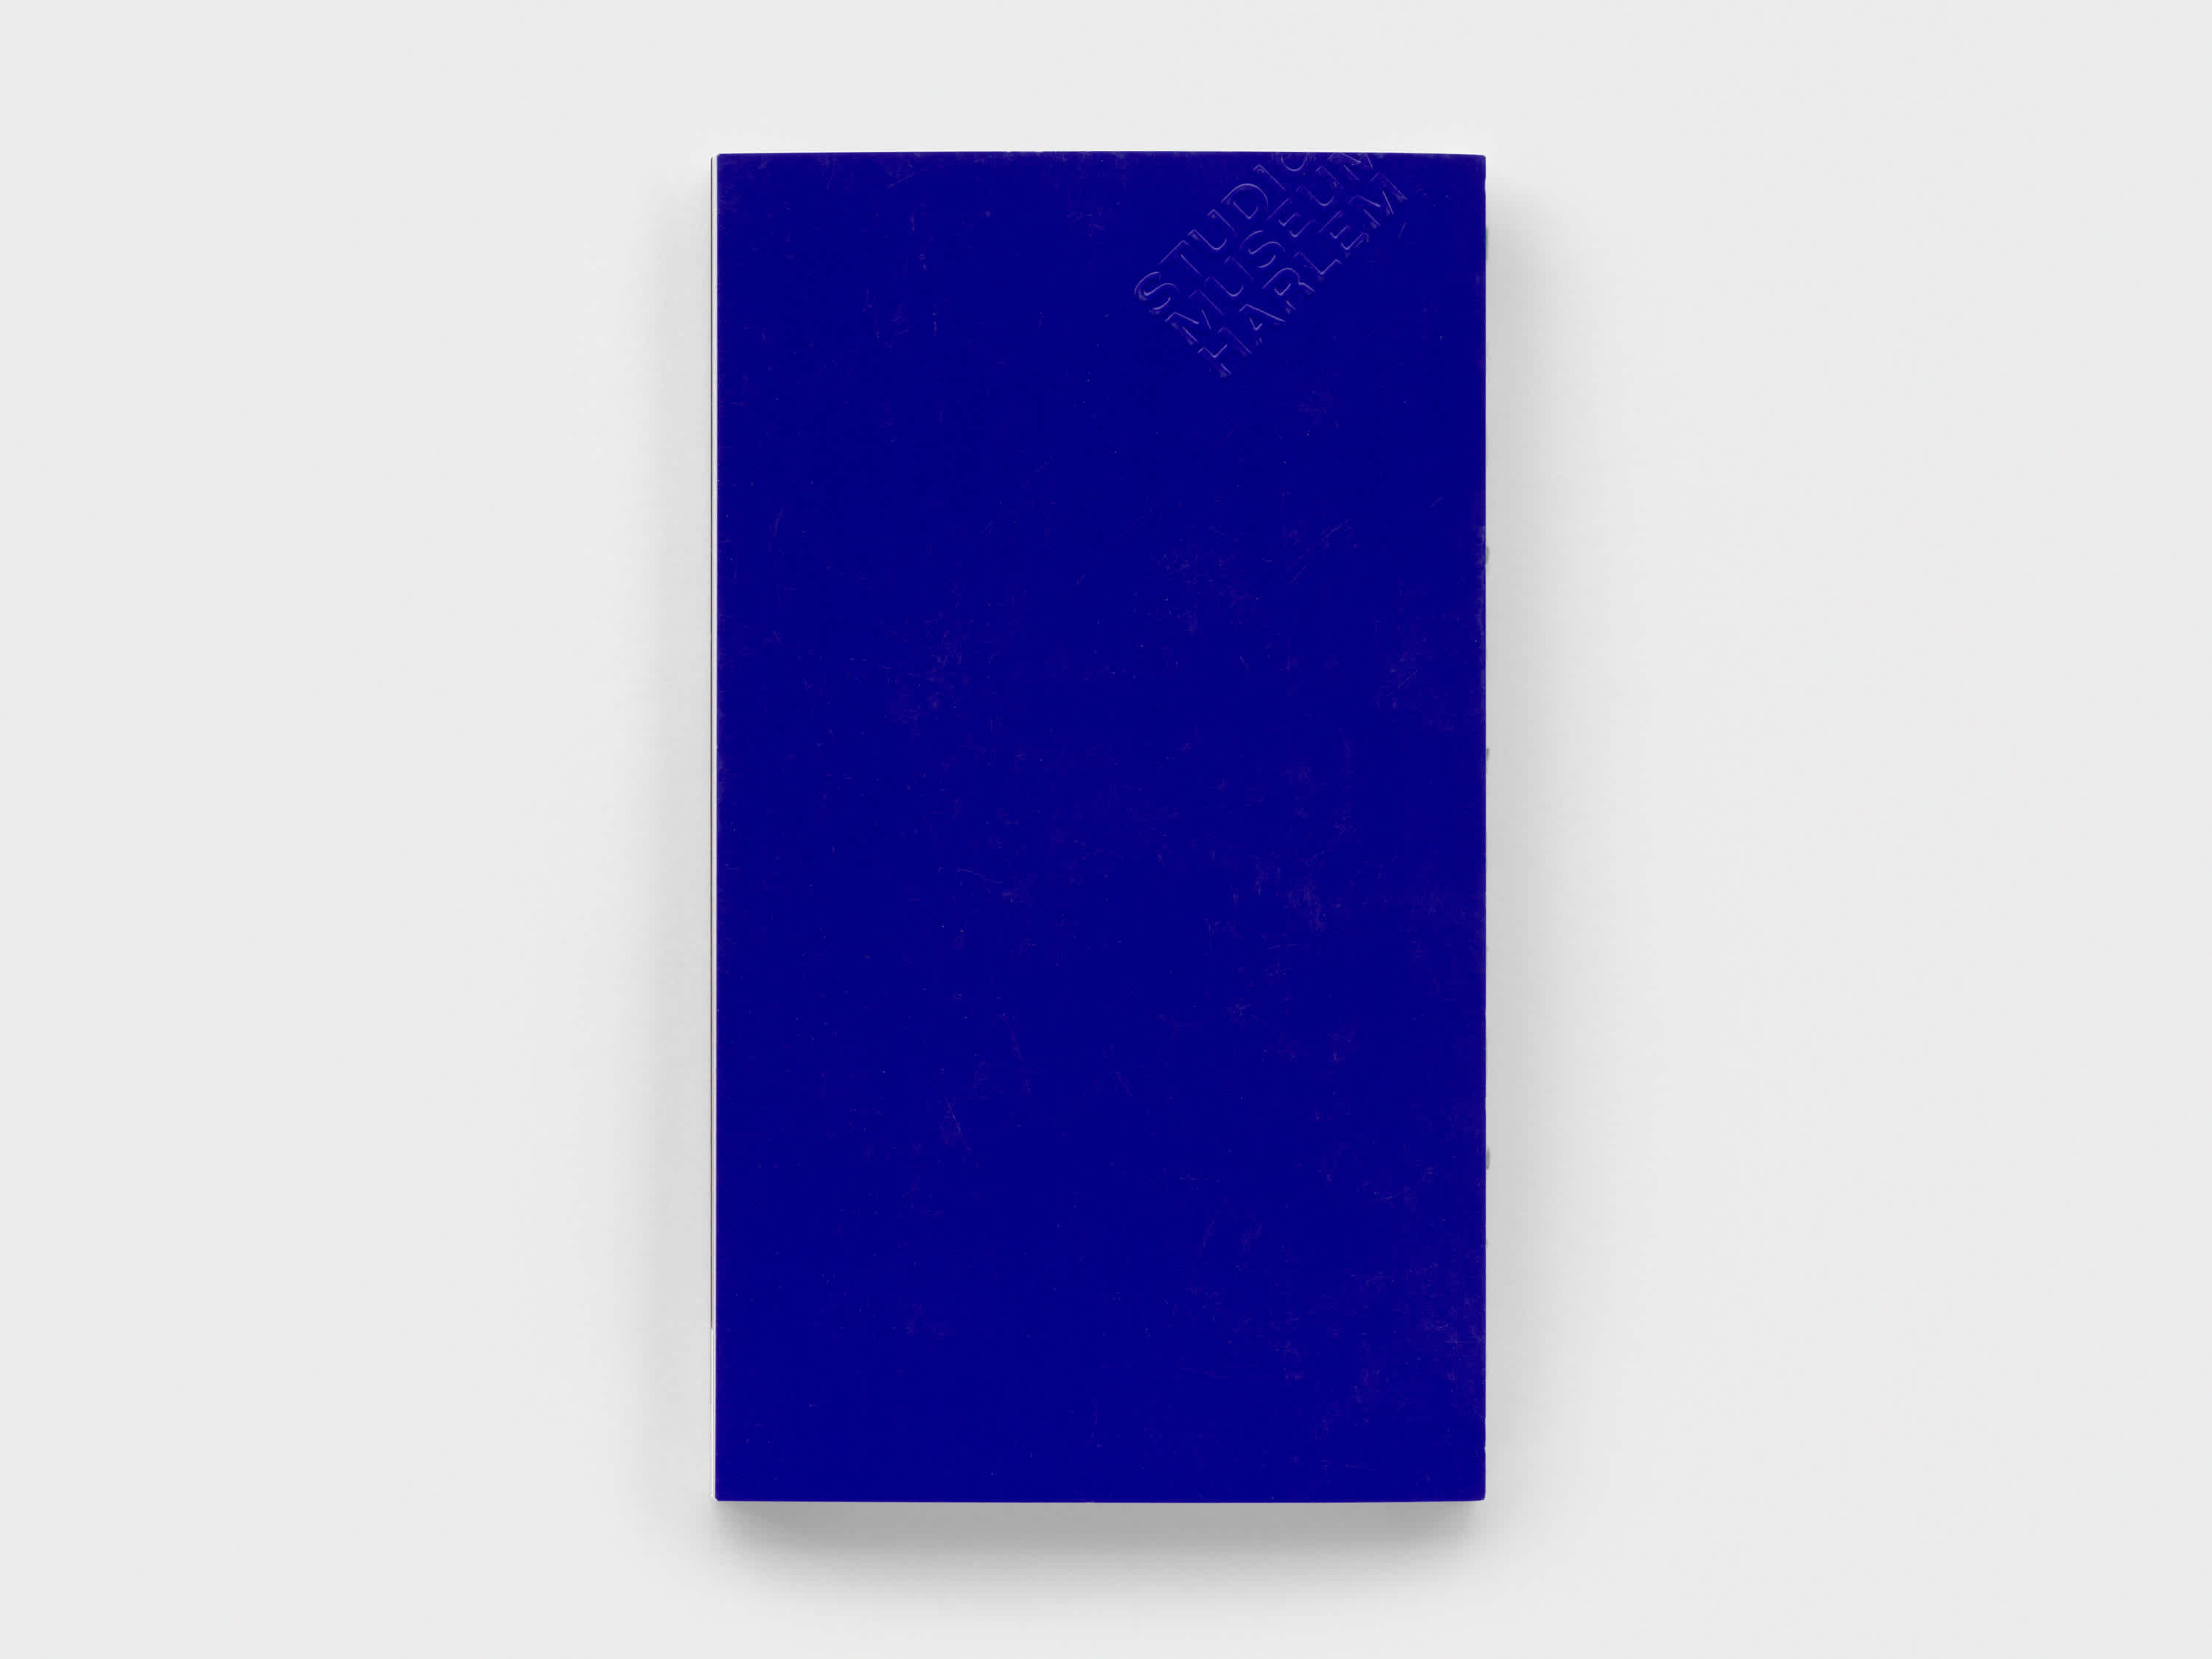 Royal blue back book cover.